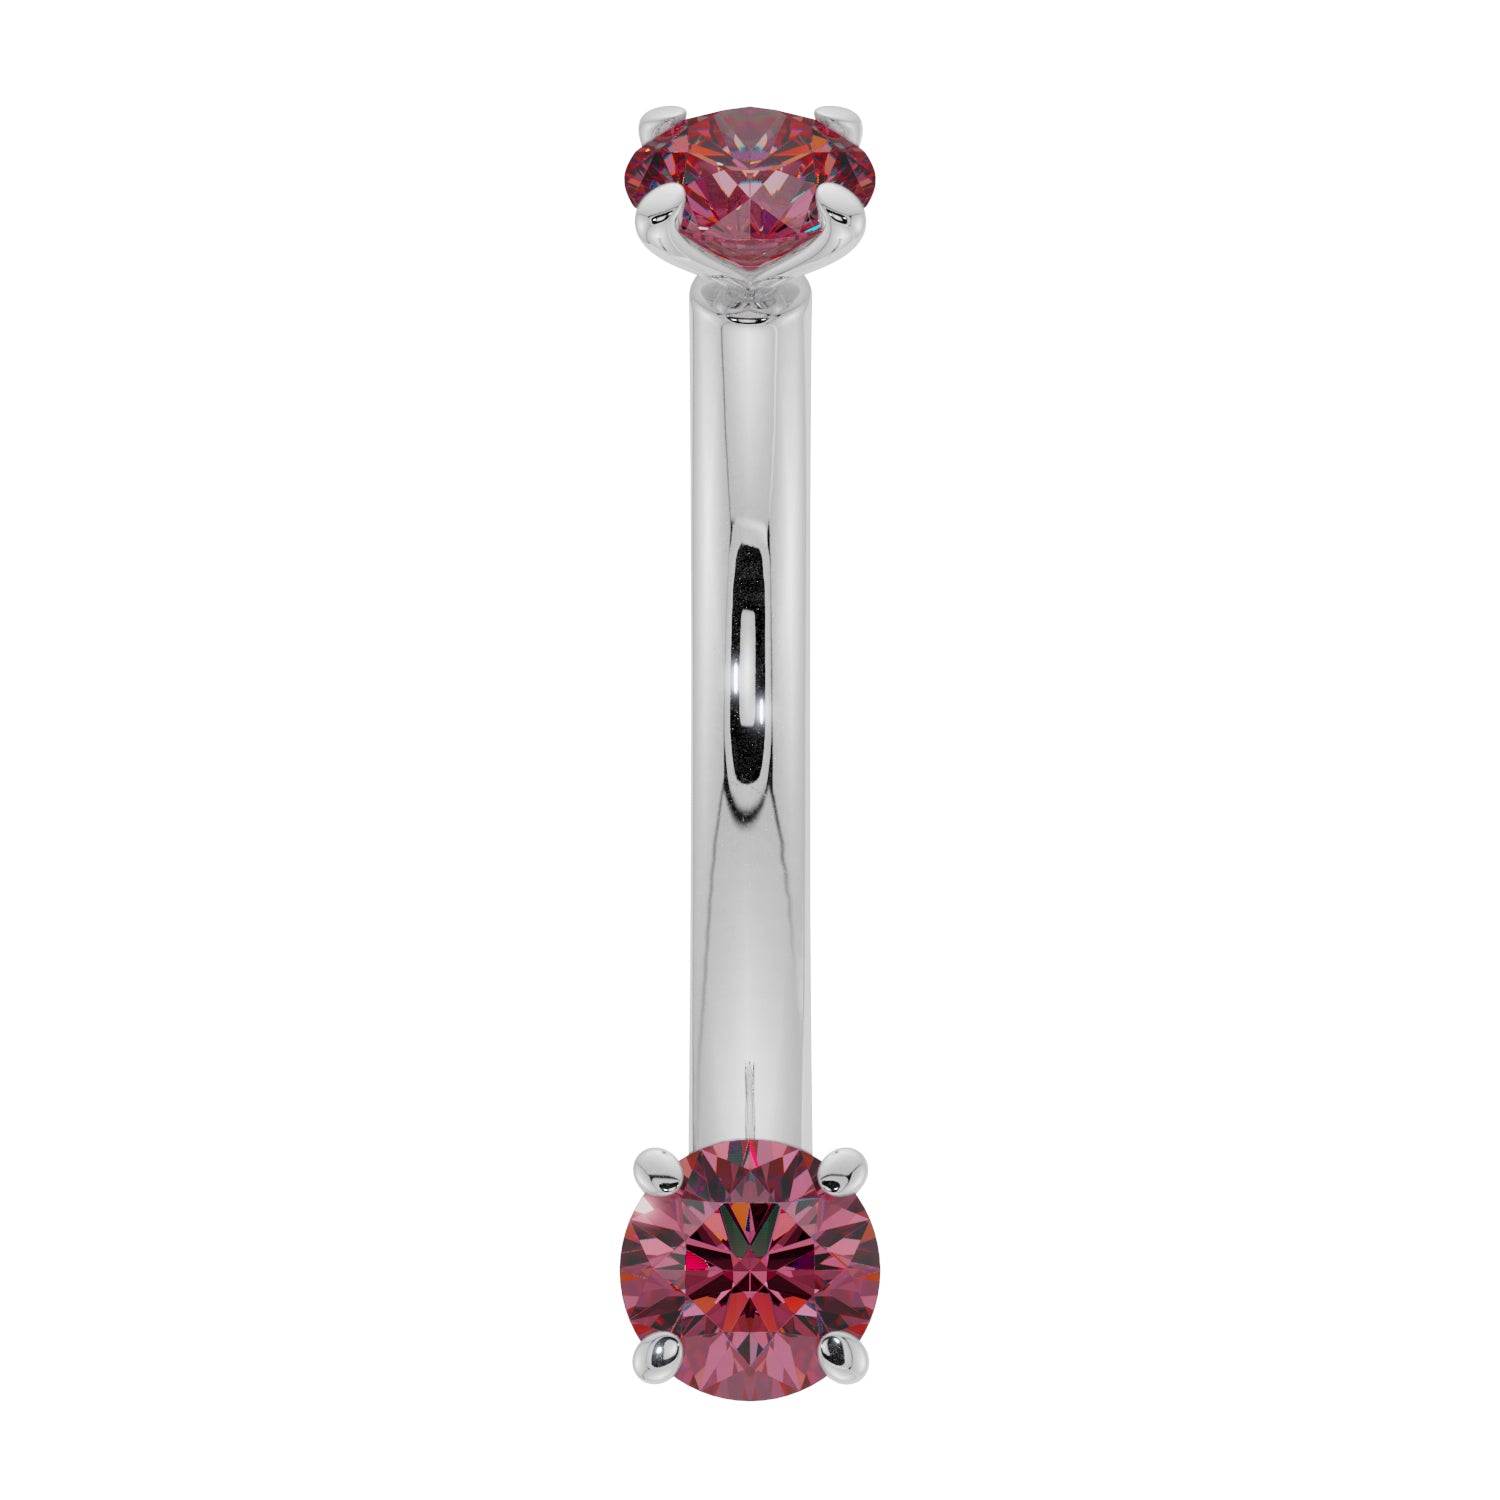 Dainty Ruby Prong-Set Curved Barbell for Eyebrow Rook Belly-14K White Gold   16G (1.2mm)   7 16